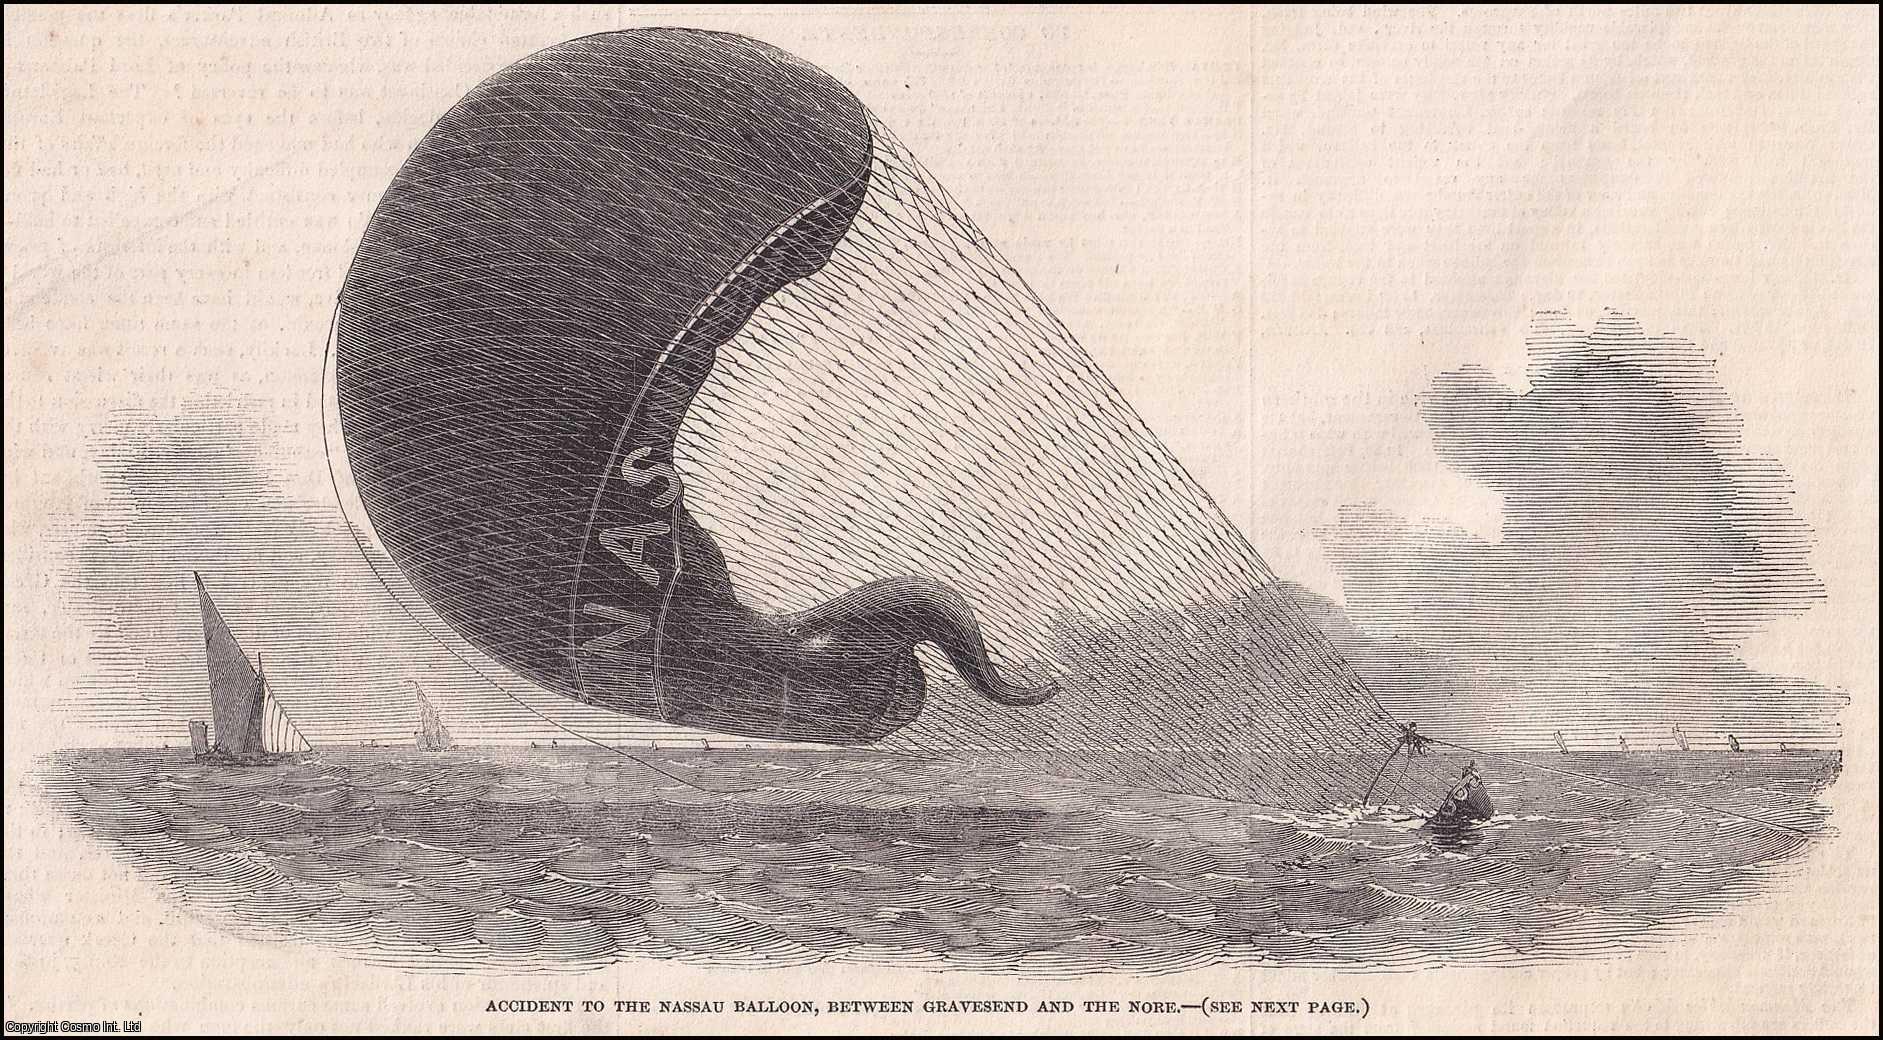 BALLOONING - The Nassau Balloon; Mr Green & Rush, Perilous Balloon Ascent from Vauxhall Gardens to the sea near Gravesend. An original print from the Illustrated London News, 1850.